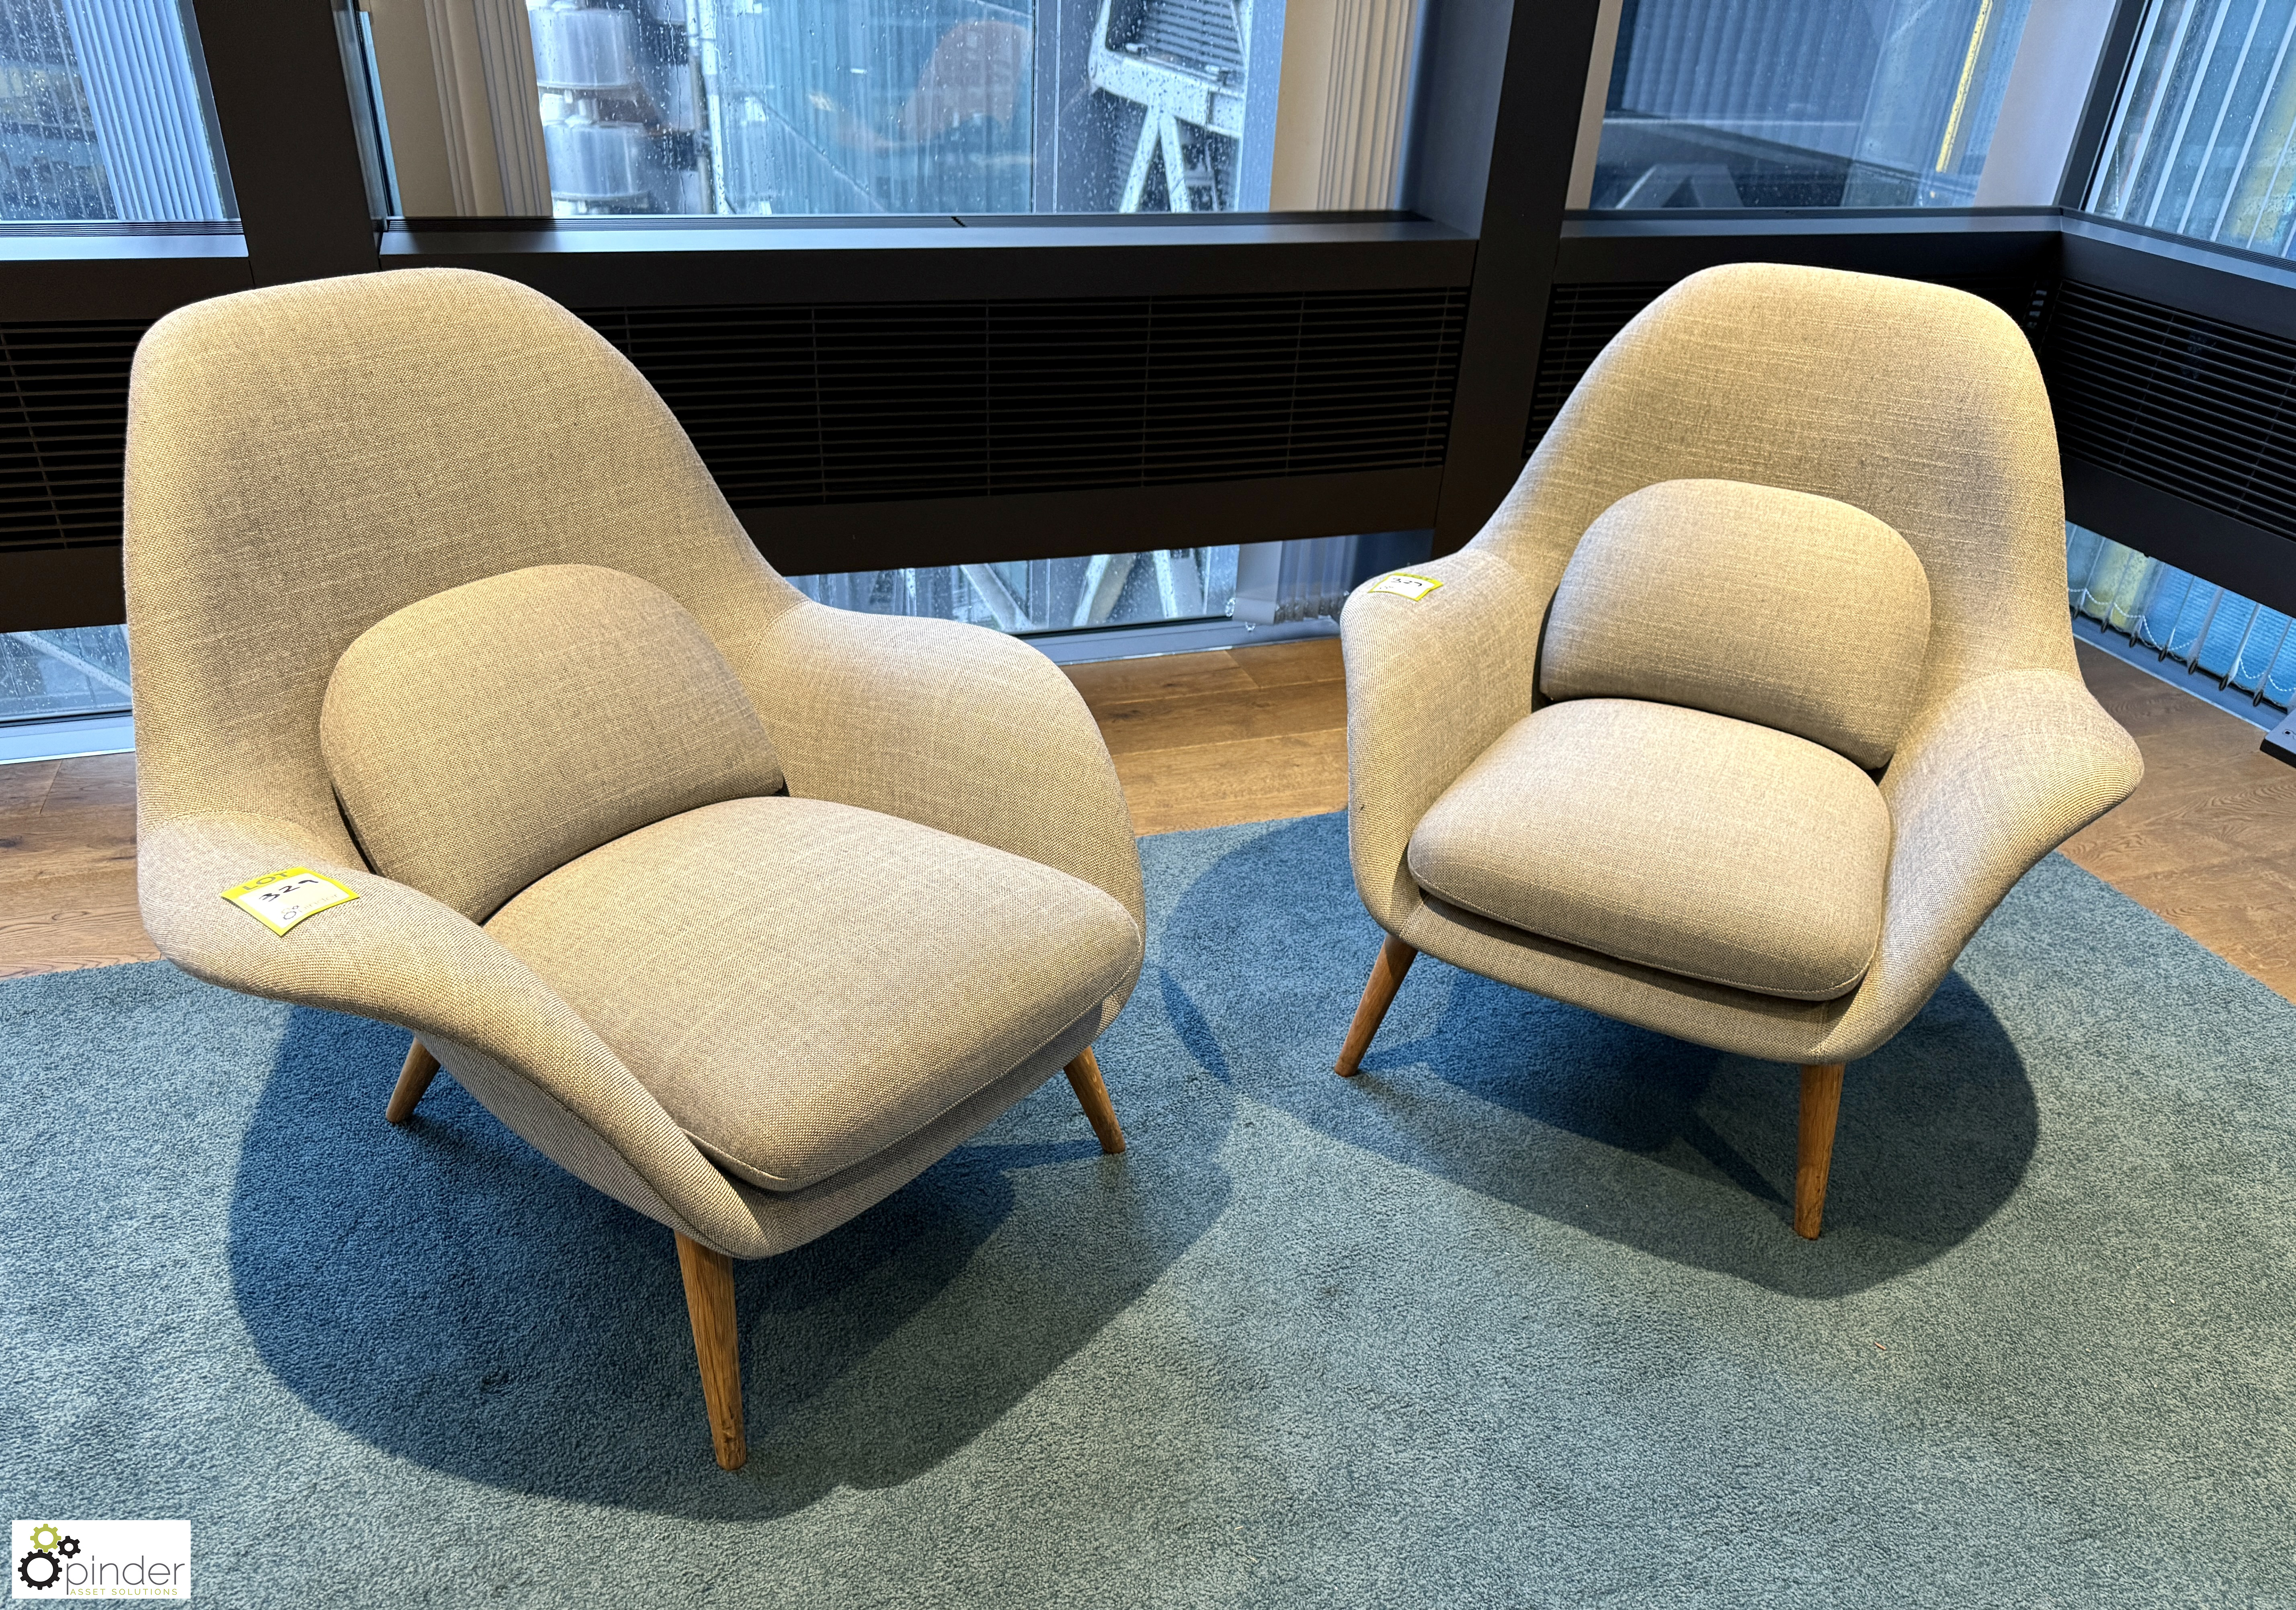 Pair Fredericia swoon upholstered Reception Chairs, designed by Space Copenhagen (location in